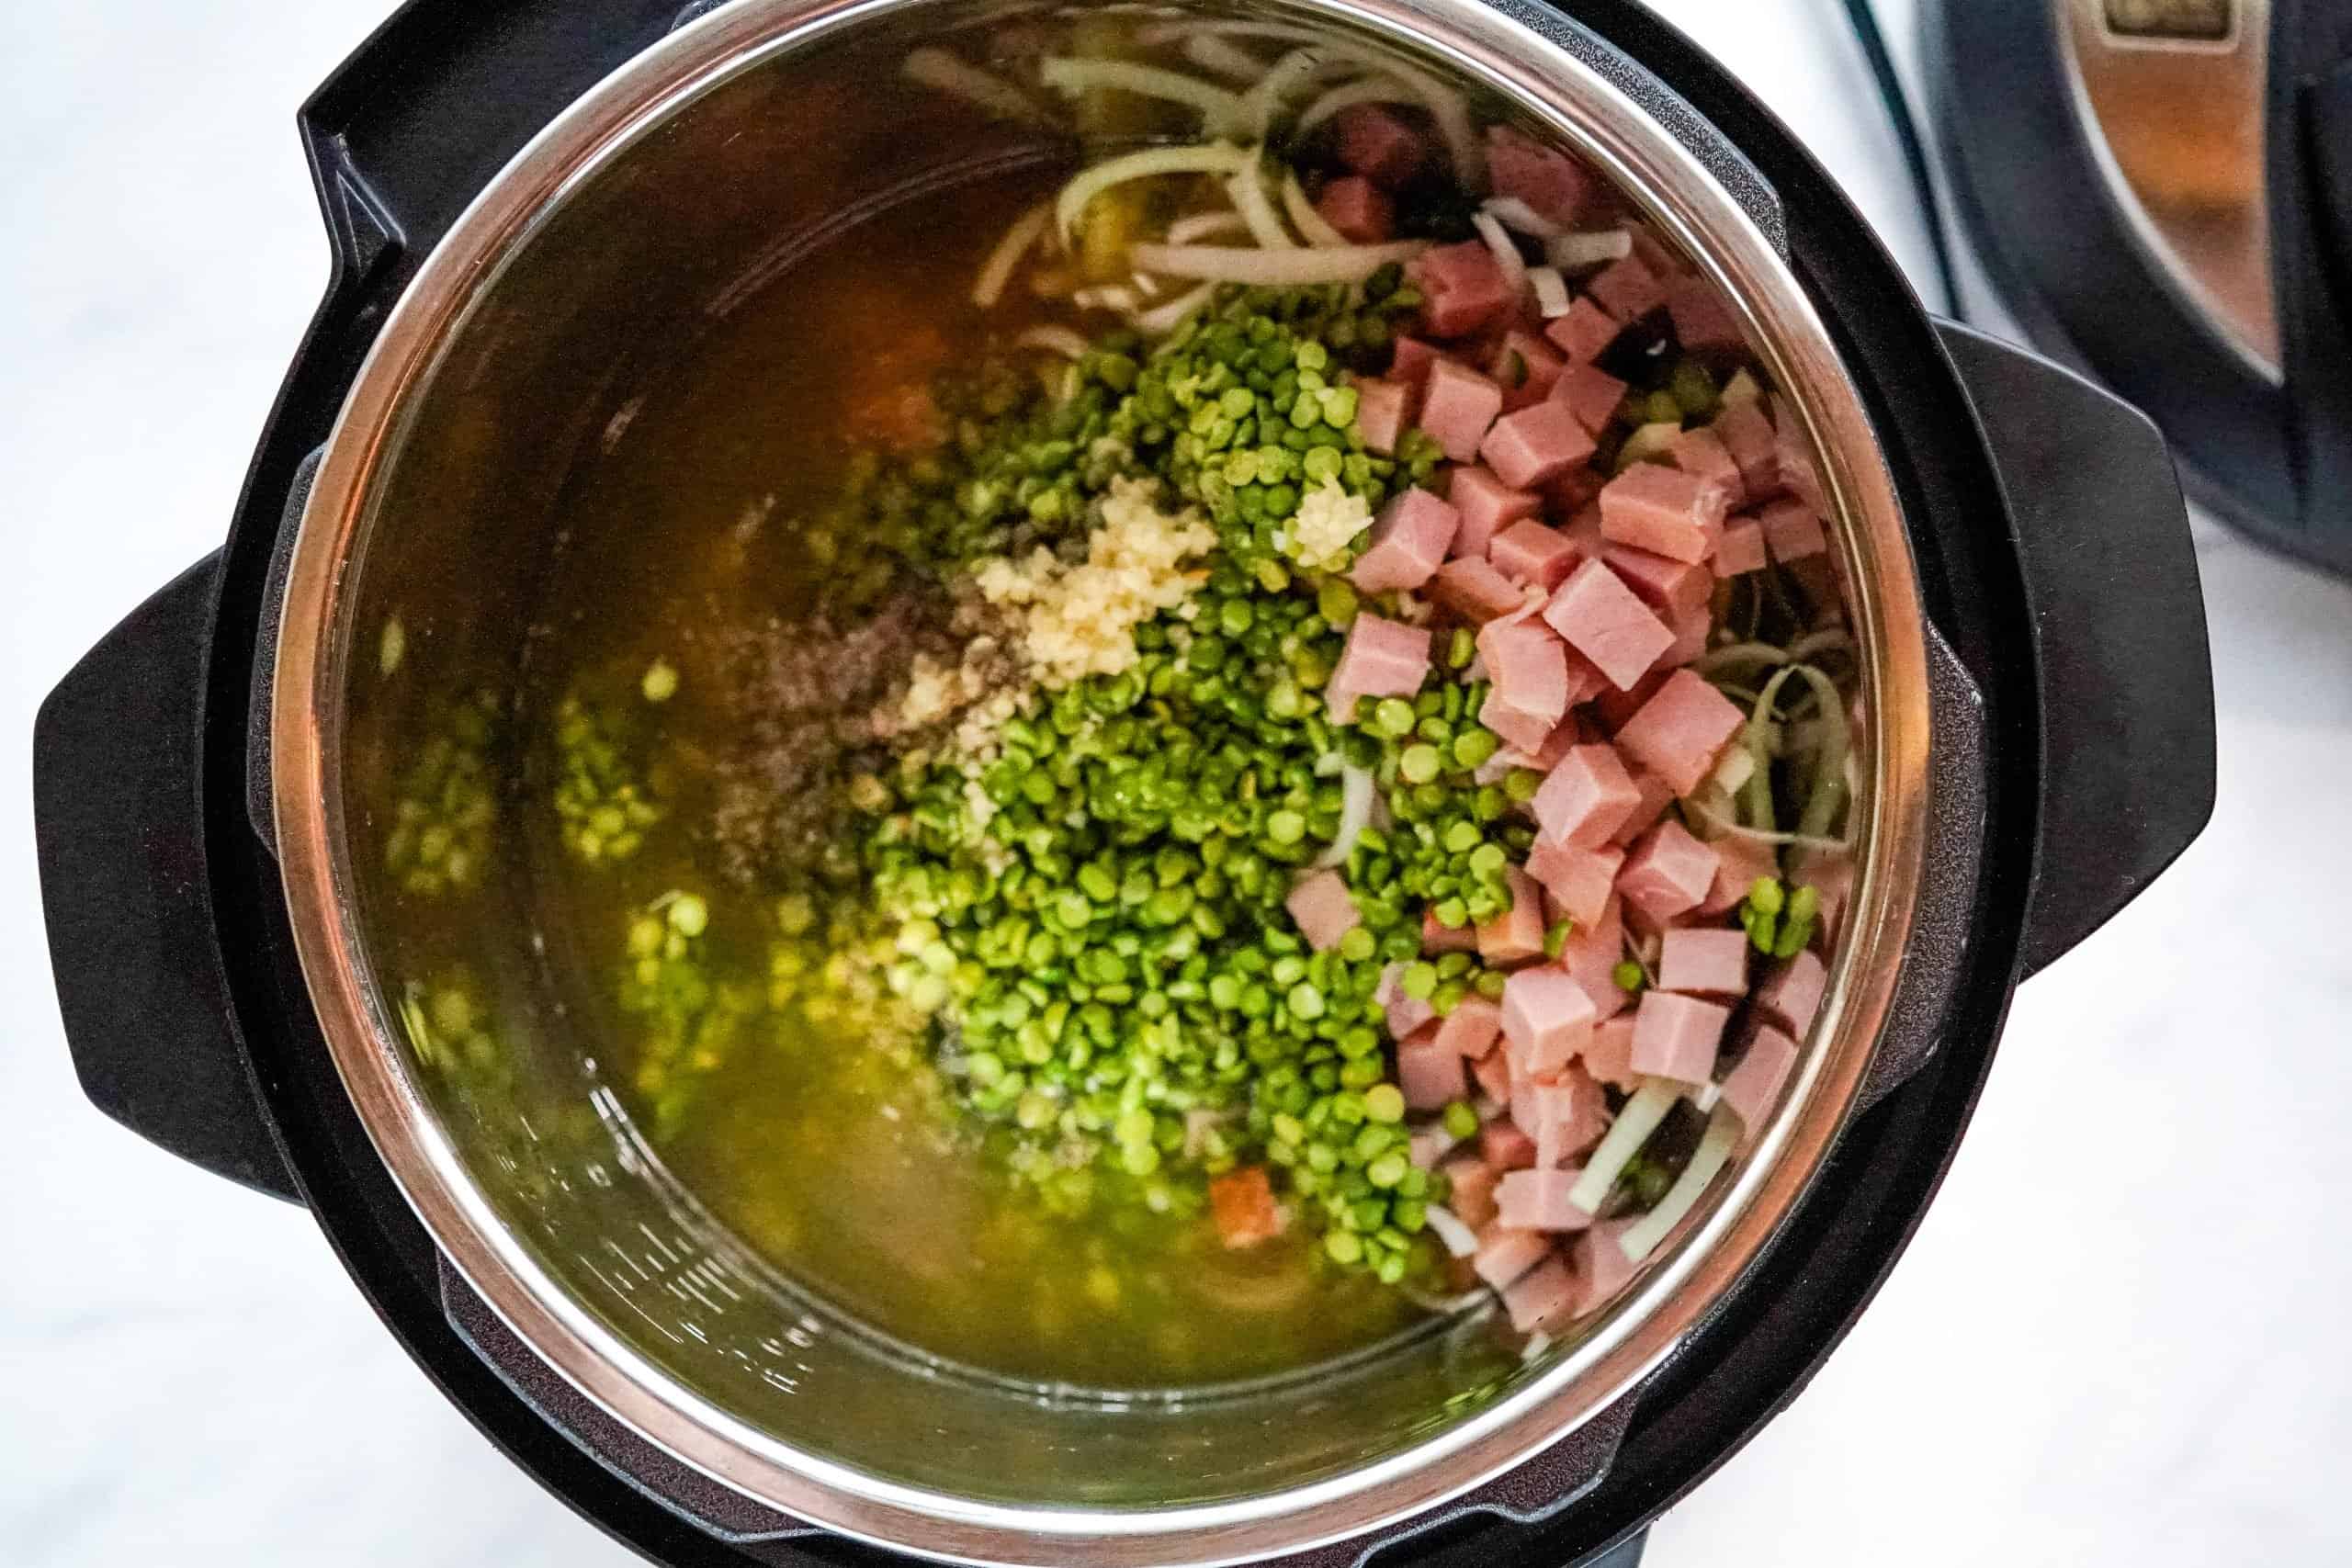 seasonings, garlic, dried split peas and chicken broth added to the instant pot.